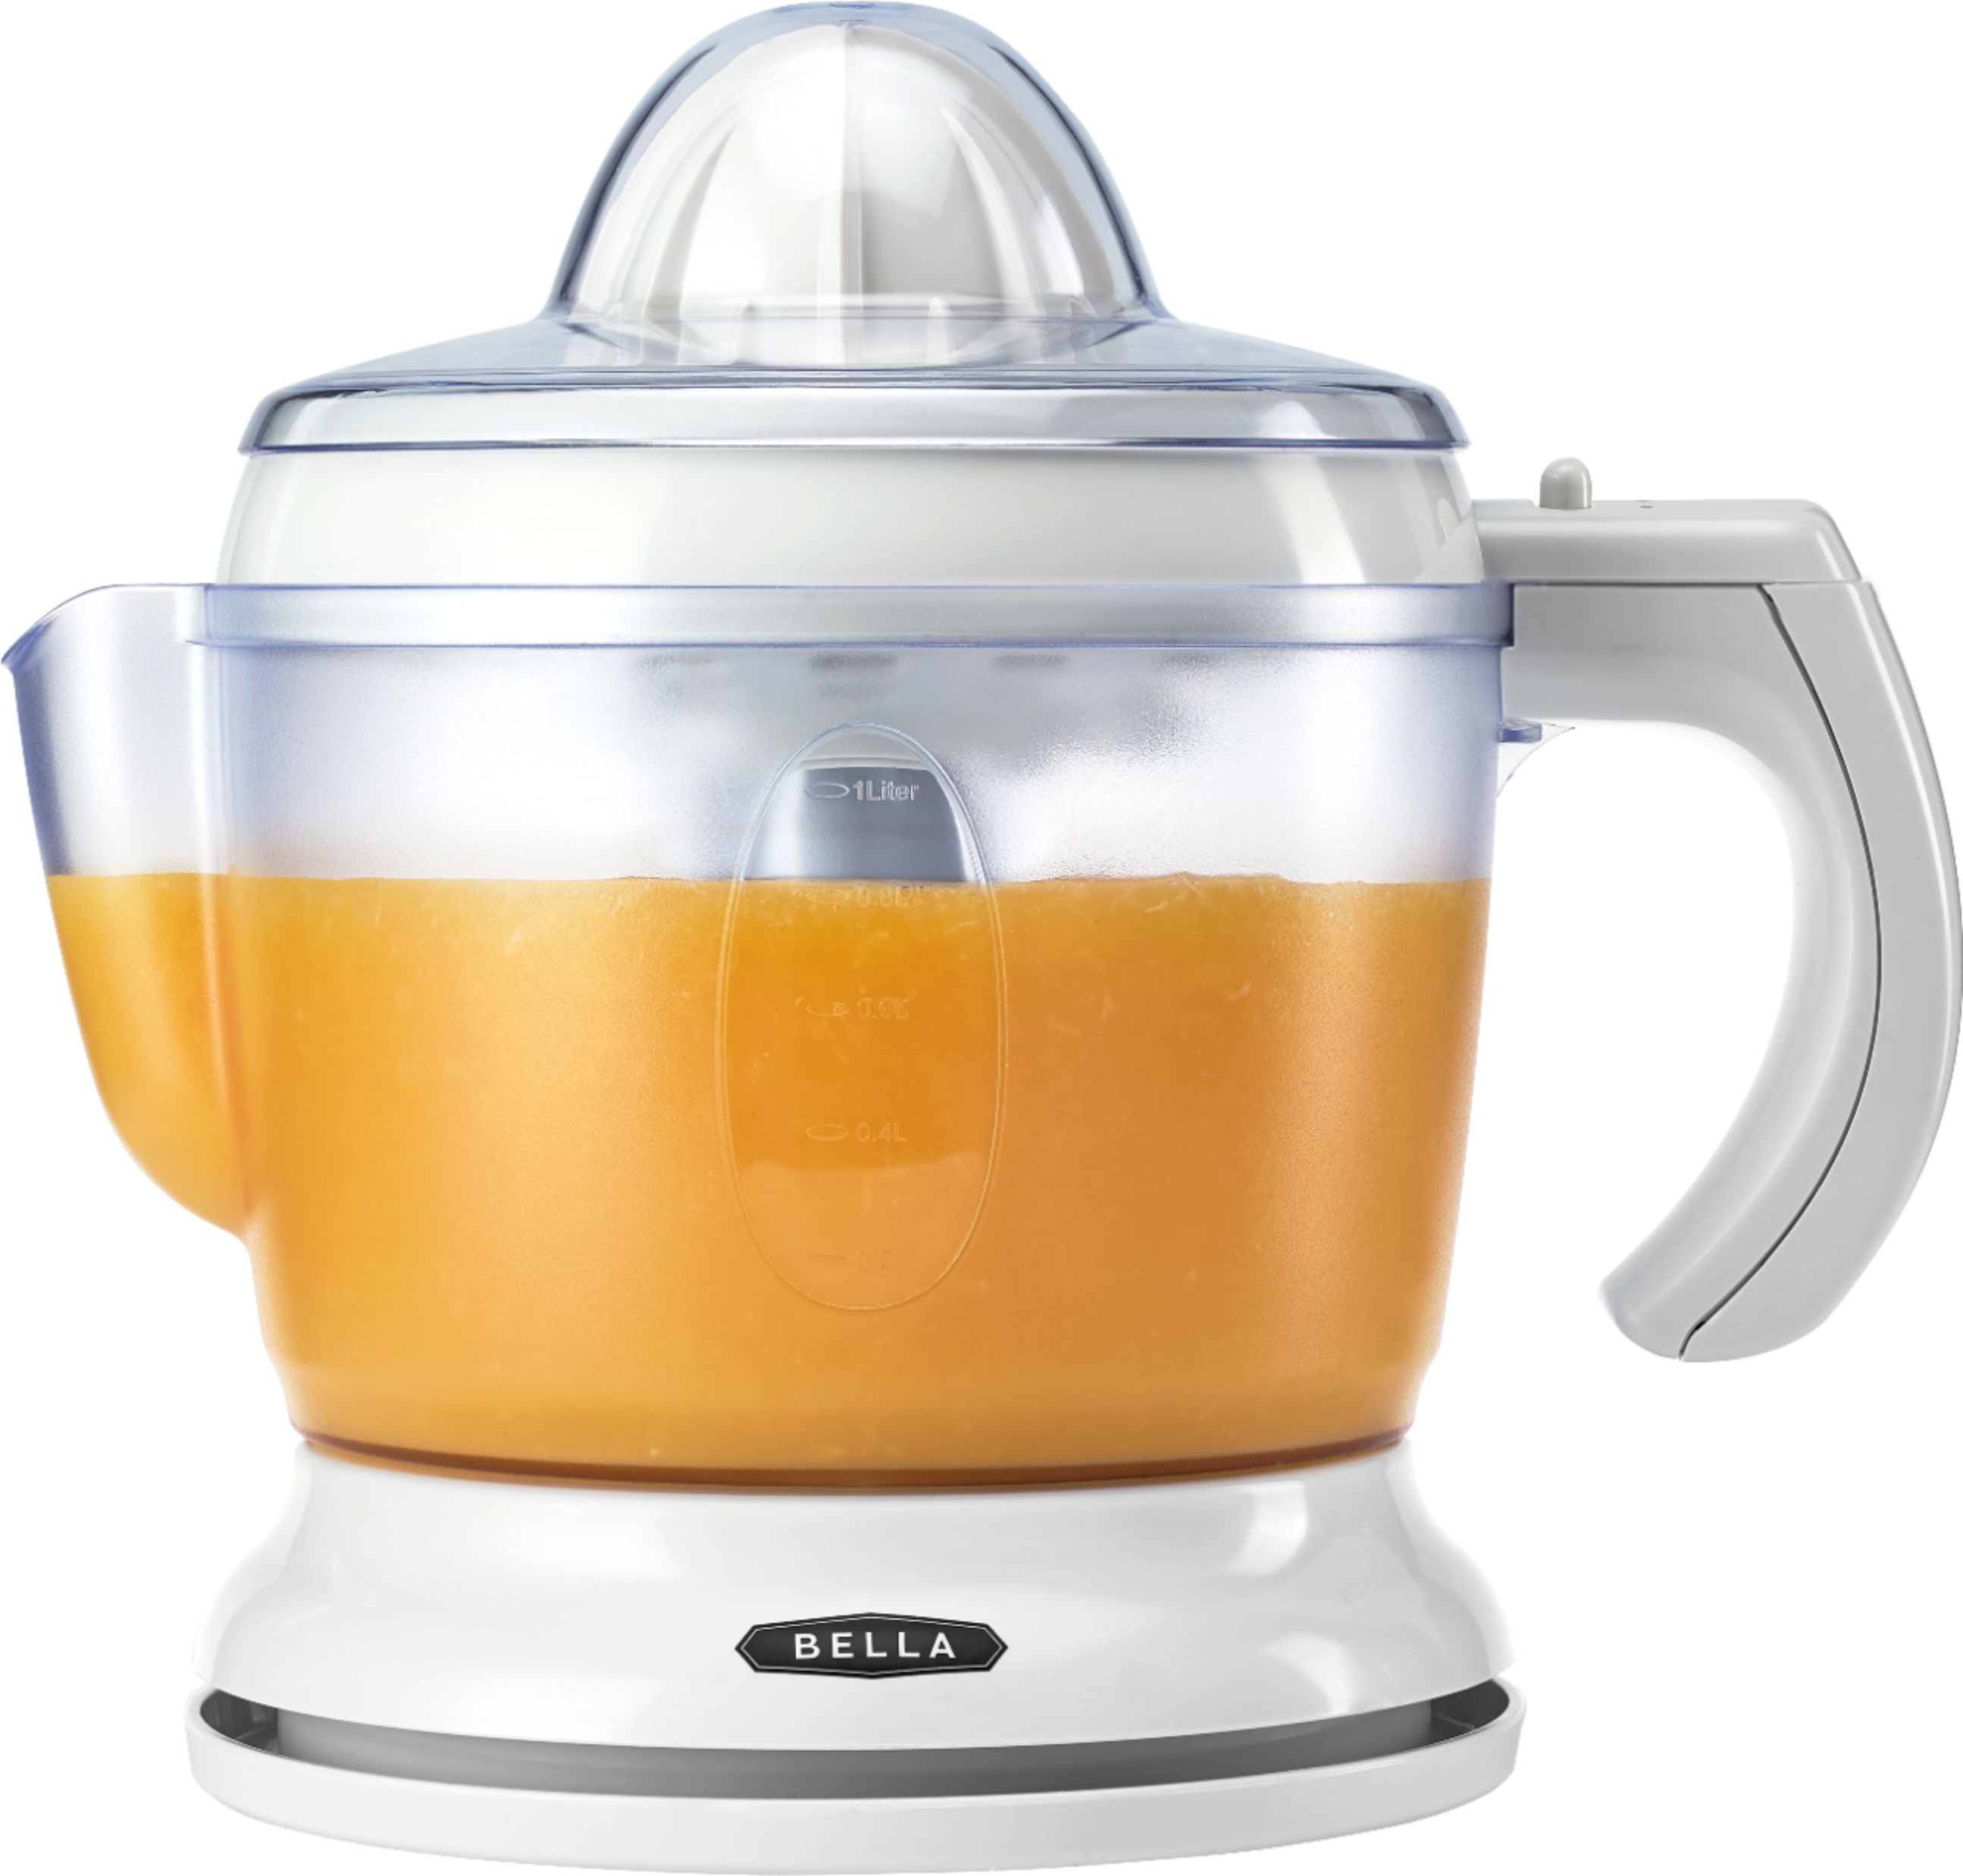 Portable Electric Juicer by Sears, White and Orange 2 Piece